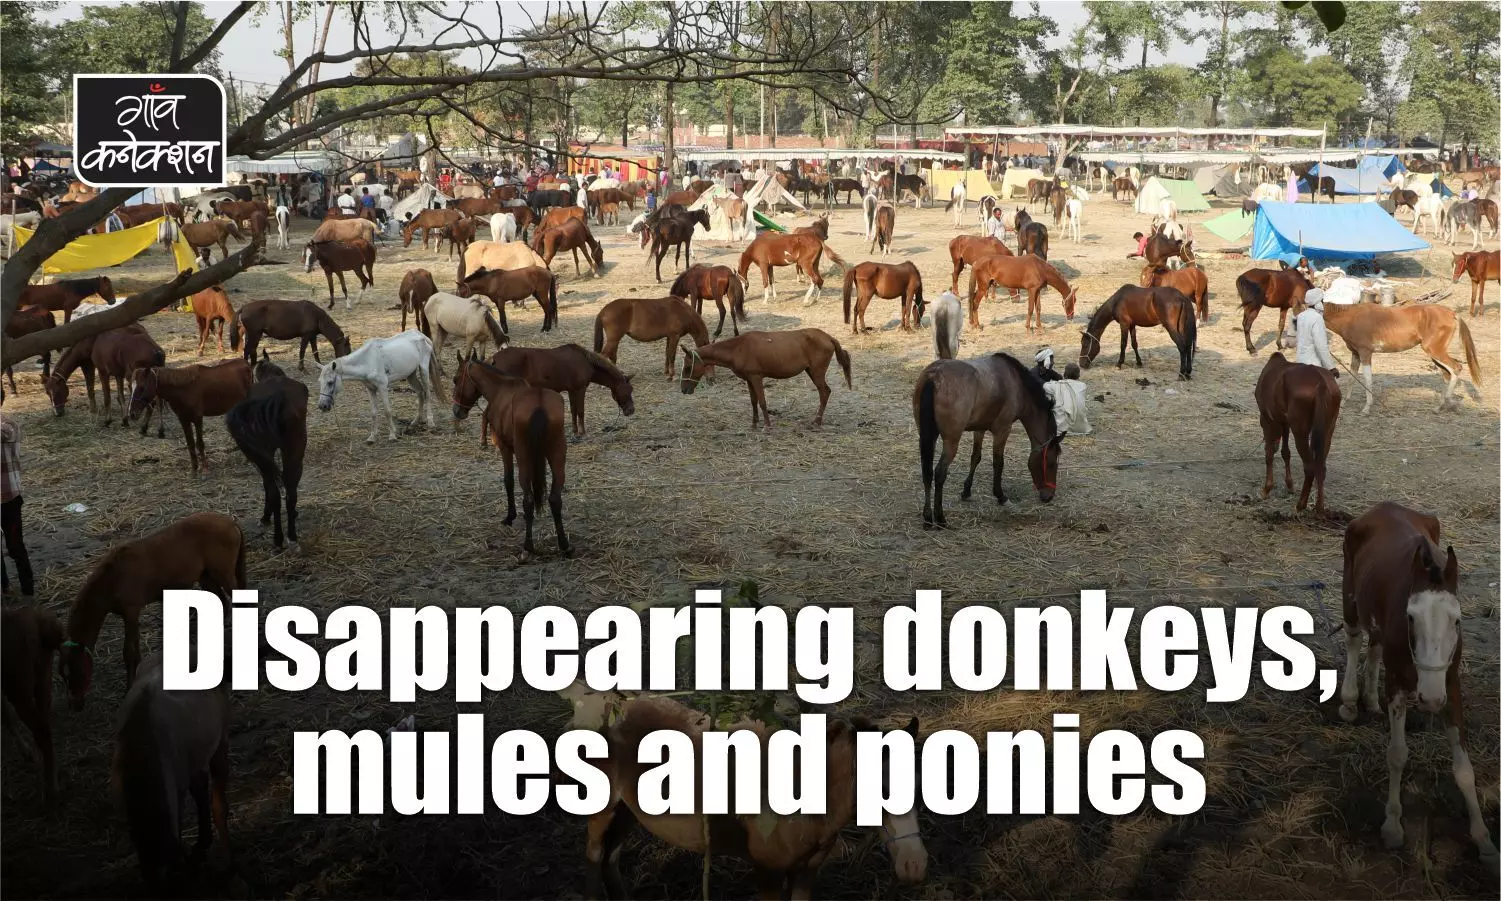 Livestock census: Population of donkeys, mules and ponies sees a dip of 52% since the 2012 census